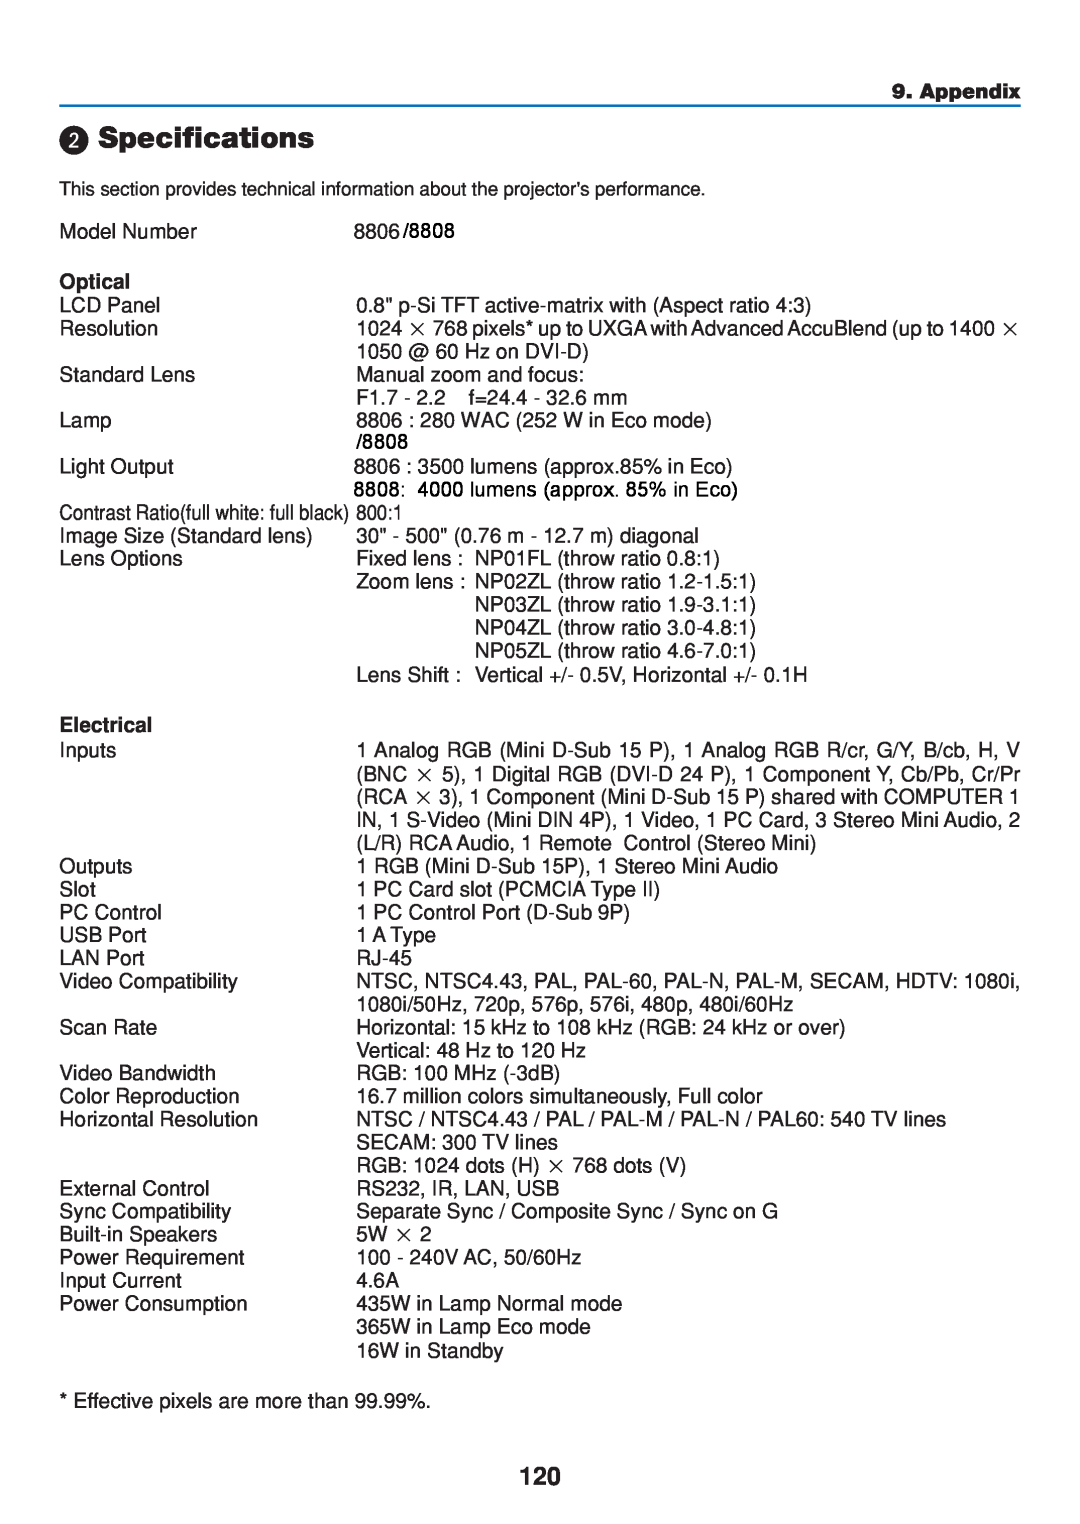 Dukane user manual Specifications, 8806 /8808, Optical, Electrical, Appendix 